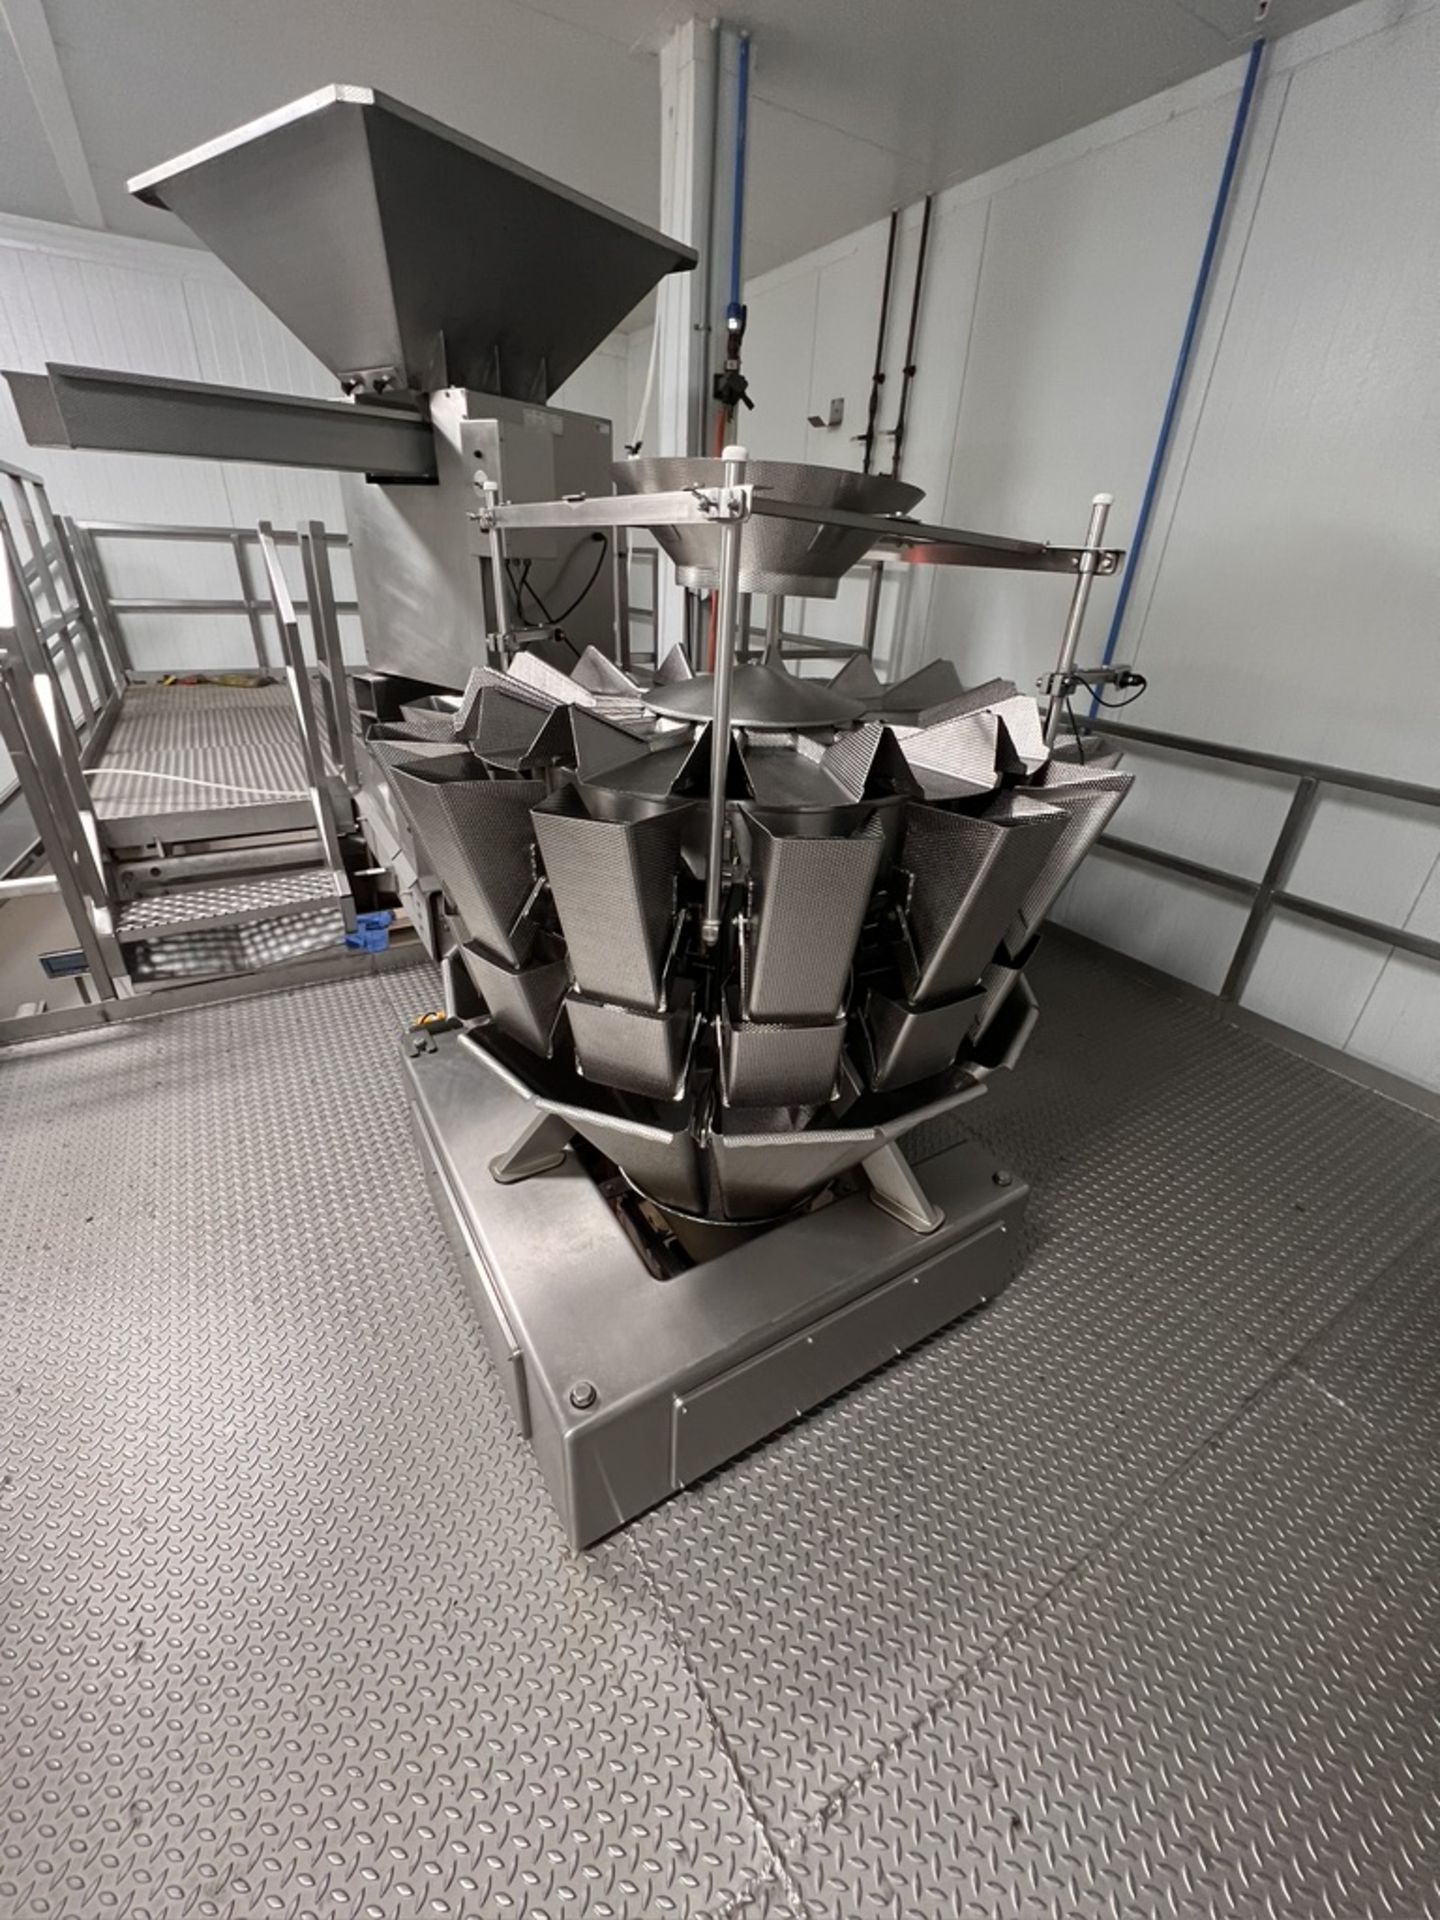 VC999 14-HEAD MULTI-WEIGHER, MODEL MULTIHEAD WEIGHER (SUBJECT TO BULK BID) - Image 4 of 8